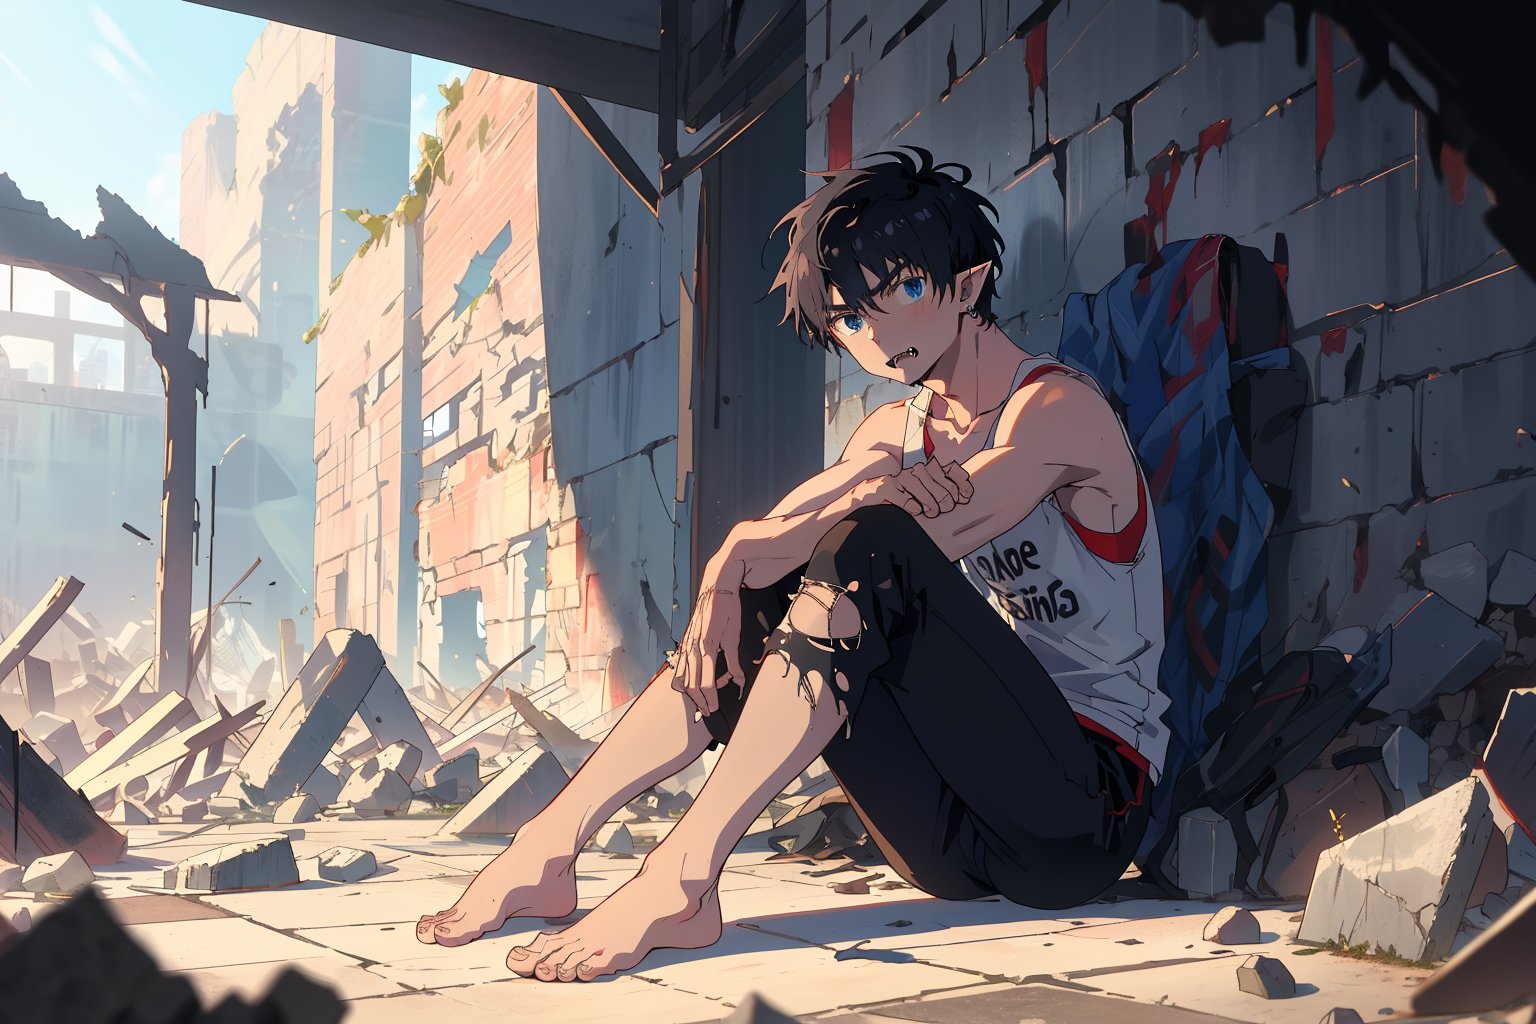 Masterpiece, best quality, anime style, {{1man,20 years old, male focus, male_solo, athletic build, tall, very short hair, black hair, blue eyes, pointy ears and fangs}} 
A lone figure sits amidst ancient ruins, gazing directly at the viewer with piercing blue eyes. Very Short,  black hair frames their heart-shaped face, and a torn black tank top clings to their bare shoulders. Black pants are ripped, revealing their bare feet as they sit barefoot among crumbling stones. The subject's closed mouth and intense stare command attention, drawing the eye to their chiseled collarbone. The warm light of day casts long shadows across the ruins, highlighting the male figure's rugged beauty amidst the decay.,Blueking,Short hair, Black hair, Blue eyes